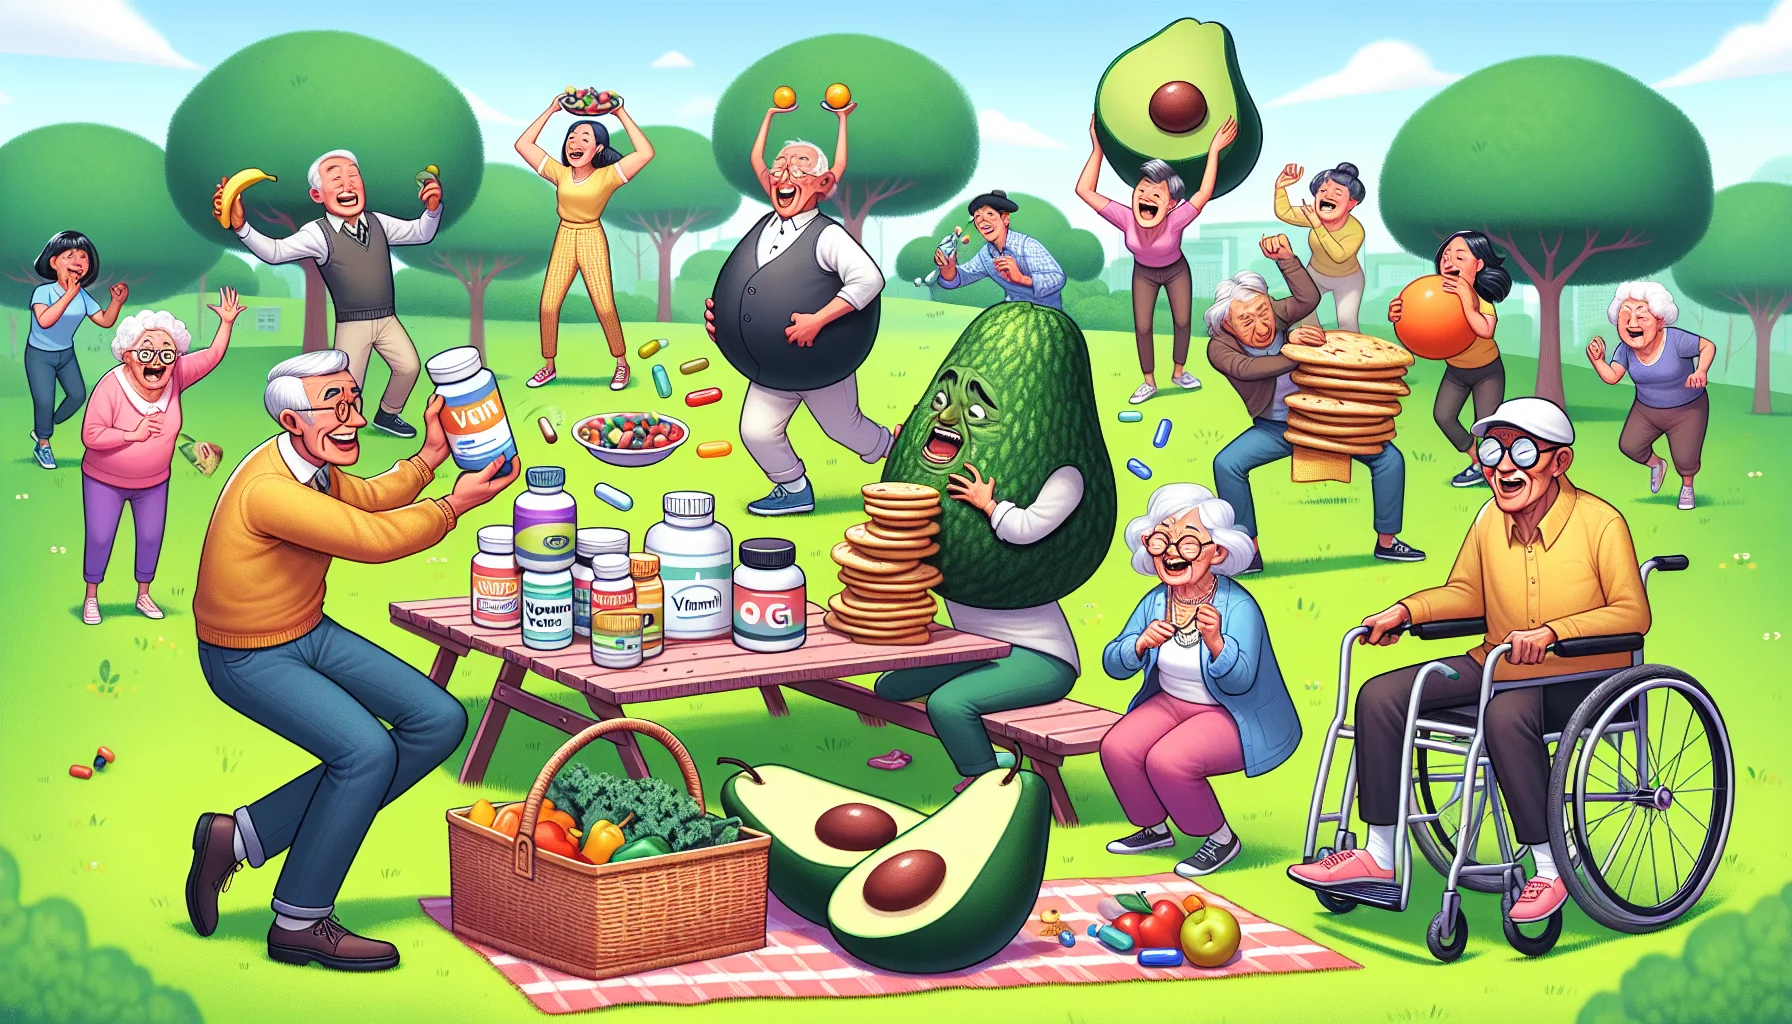 Imagine a humorous situation taking place in a lively park. A group of seniors with different backgrounds are engaging in a picnic. A Caucasian gentleman is comically trying to balance stacked vitamin tablets instead of cookies. A Hispanic woman is laughing and unrolling a yoga mat made of kale. An Asian grandpa is straining comically to open a giant avocado instead of a medicine bottle. Meanwhile, a black granny is playfully chasing a pear with her walker, instead of a bingo ball. Their picnic basket is filled with colorful fruits, vegetables and vitamin containers, suggesting a healthy lifestyle.